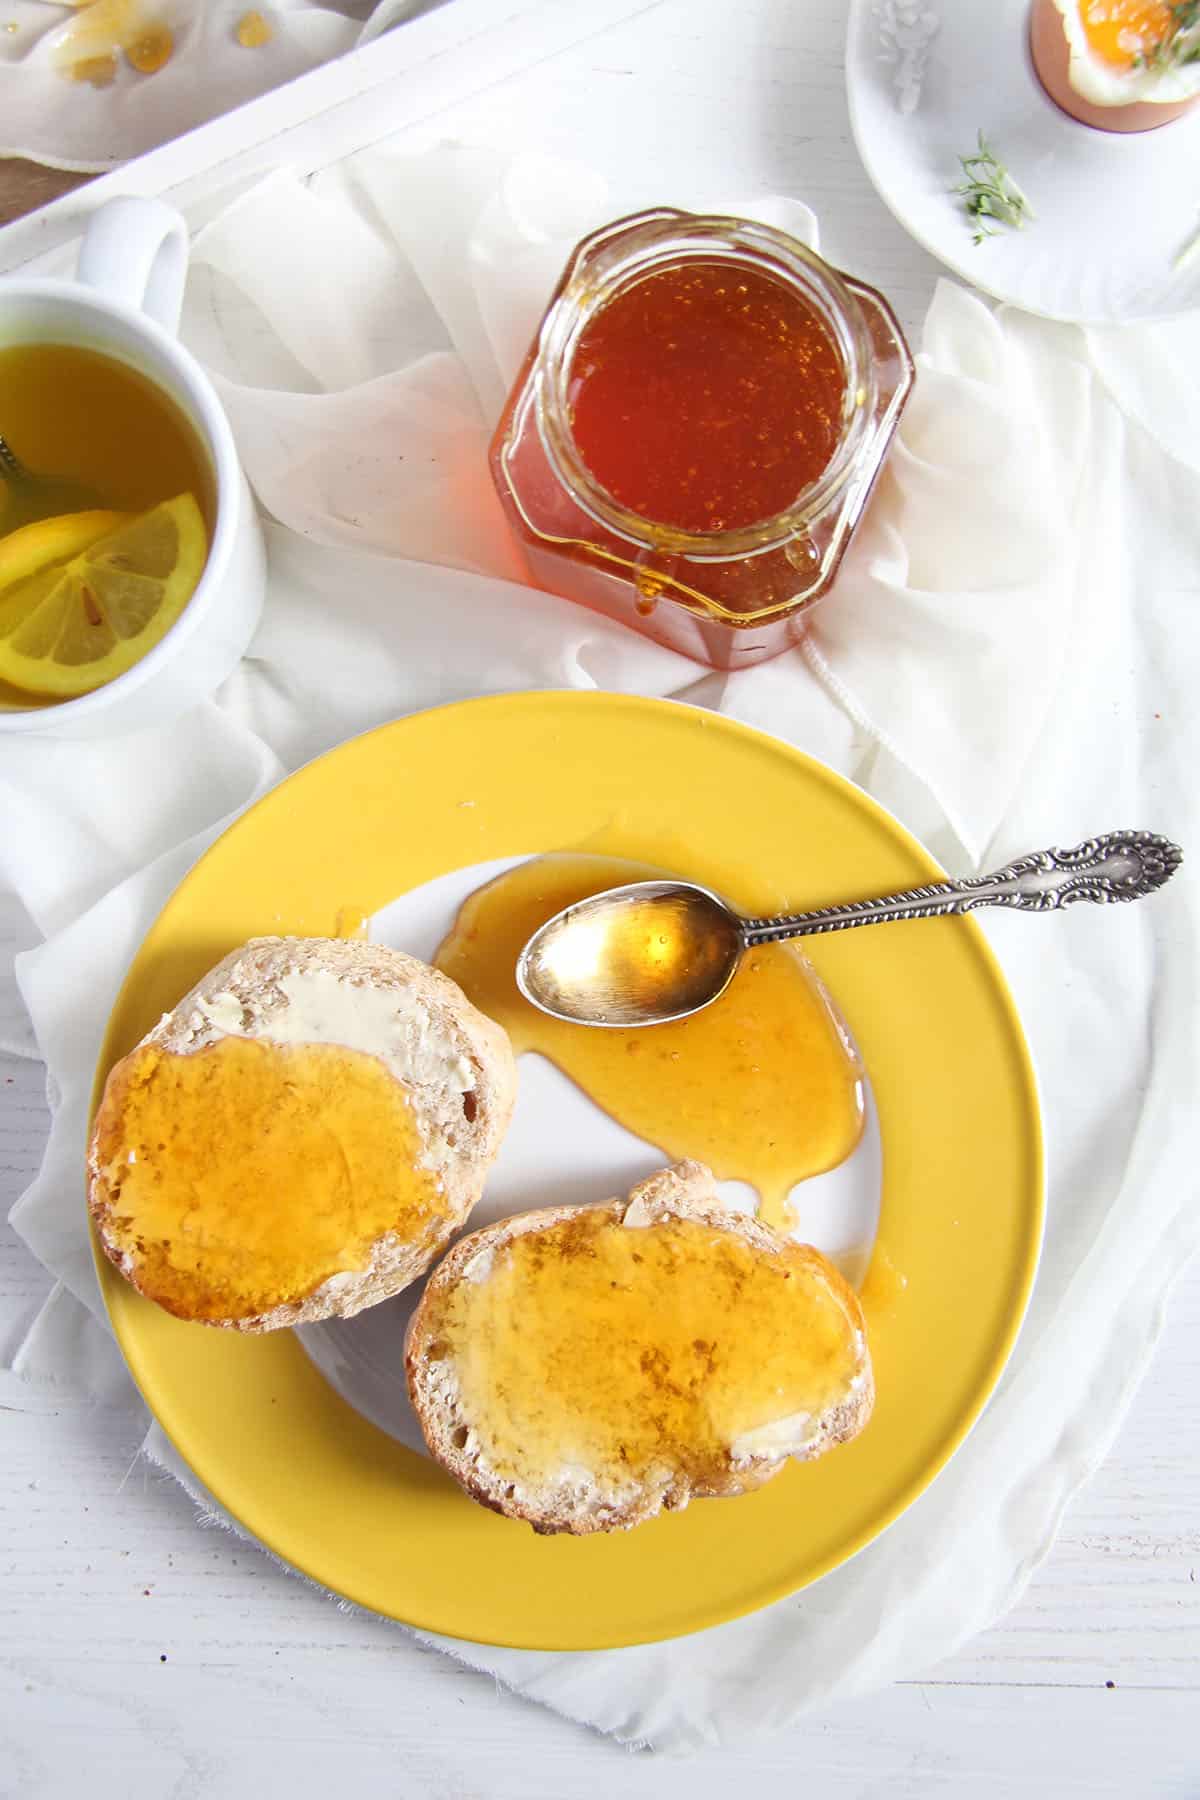 bread rolls with butter and lemon jelly on a yellow plate.